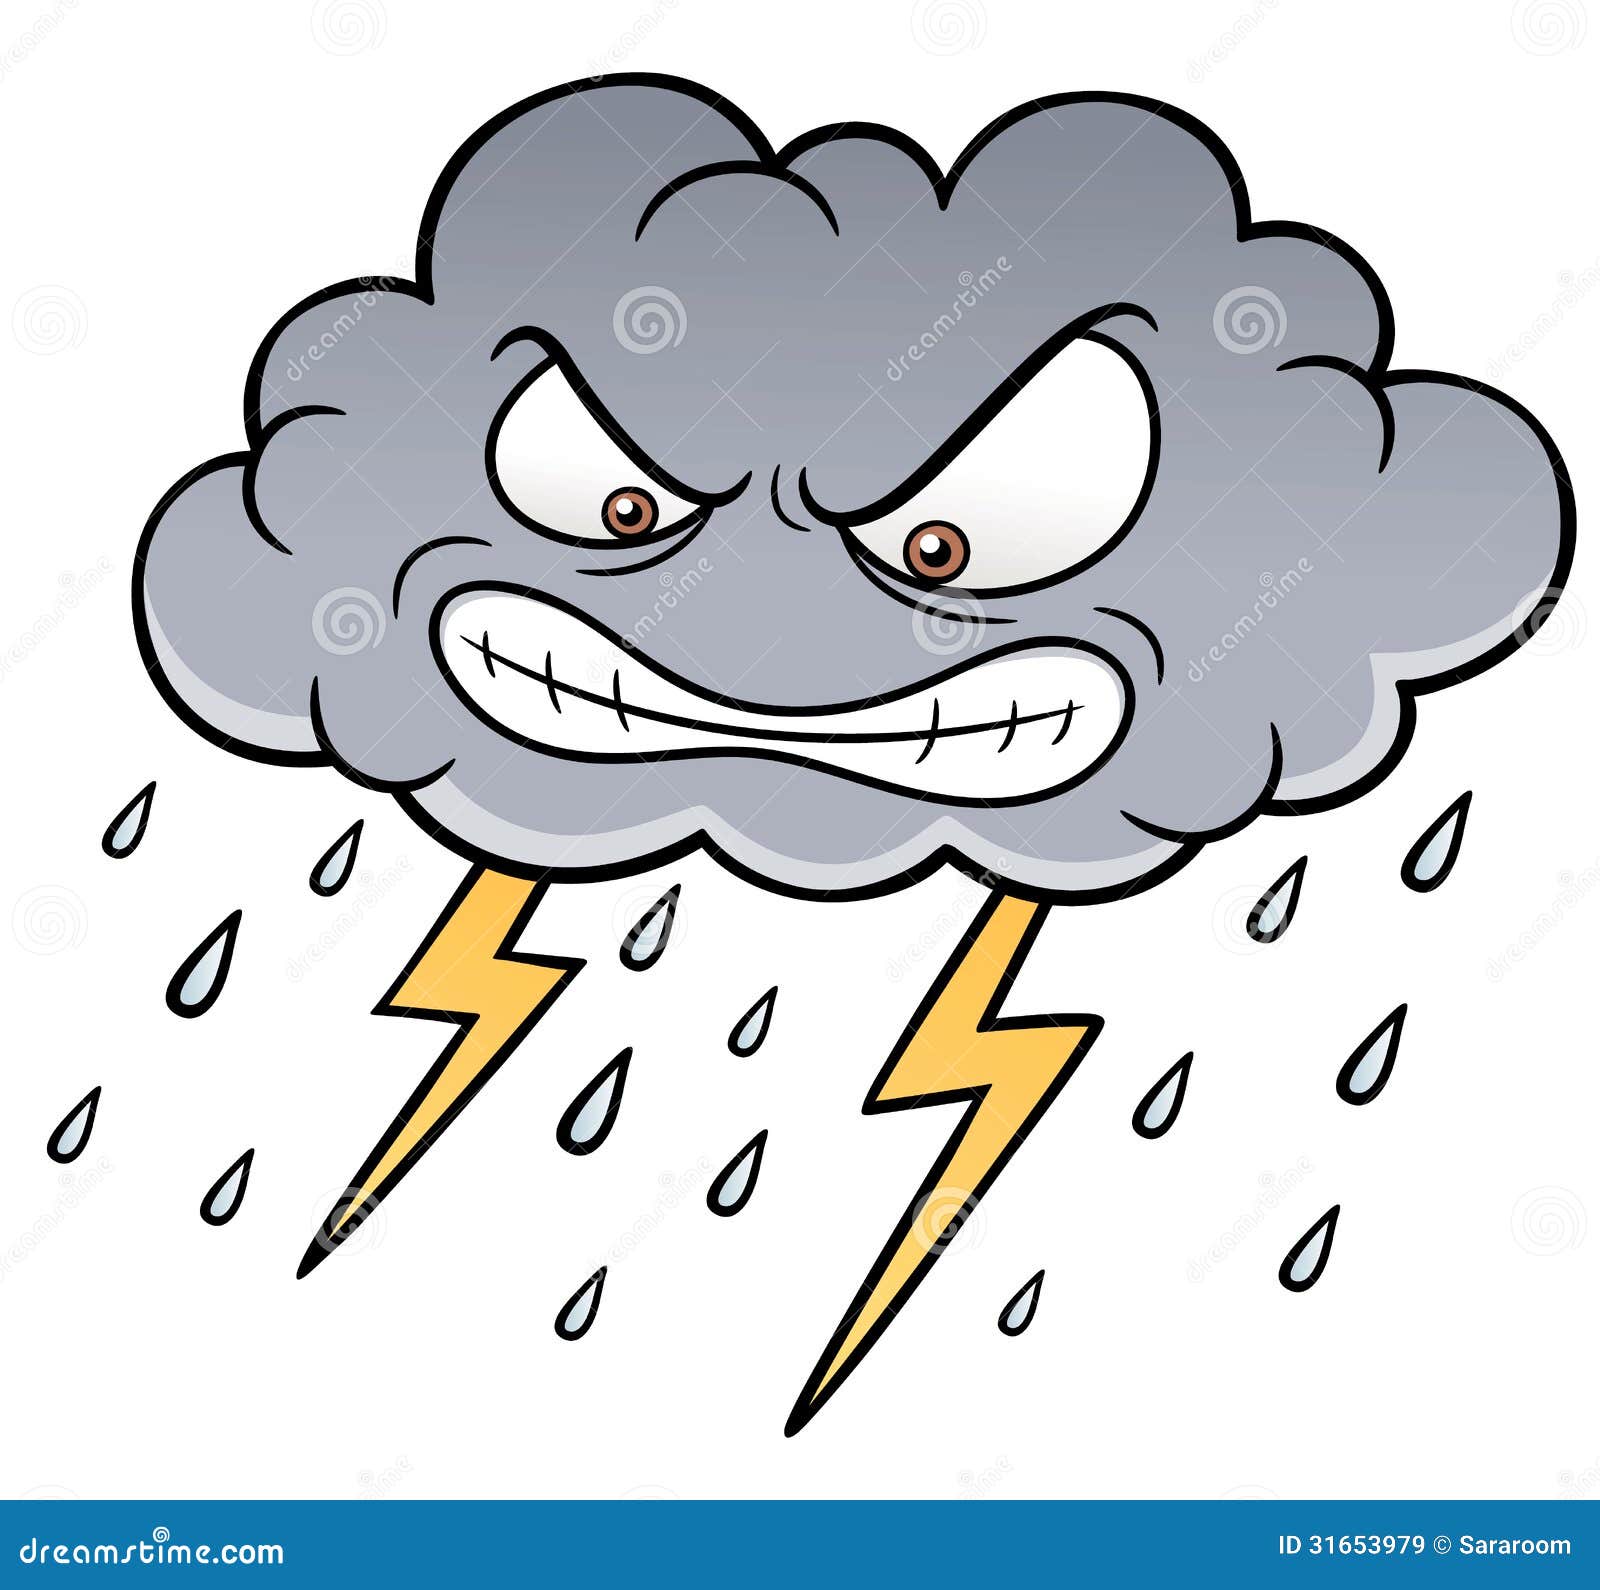 Cartoon Clouds with Thunder Stock Vector - Illustration of lighting,  drawing: 31653979